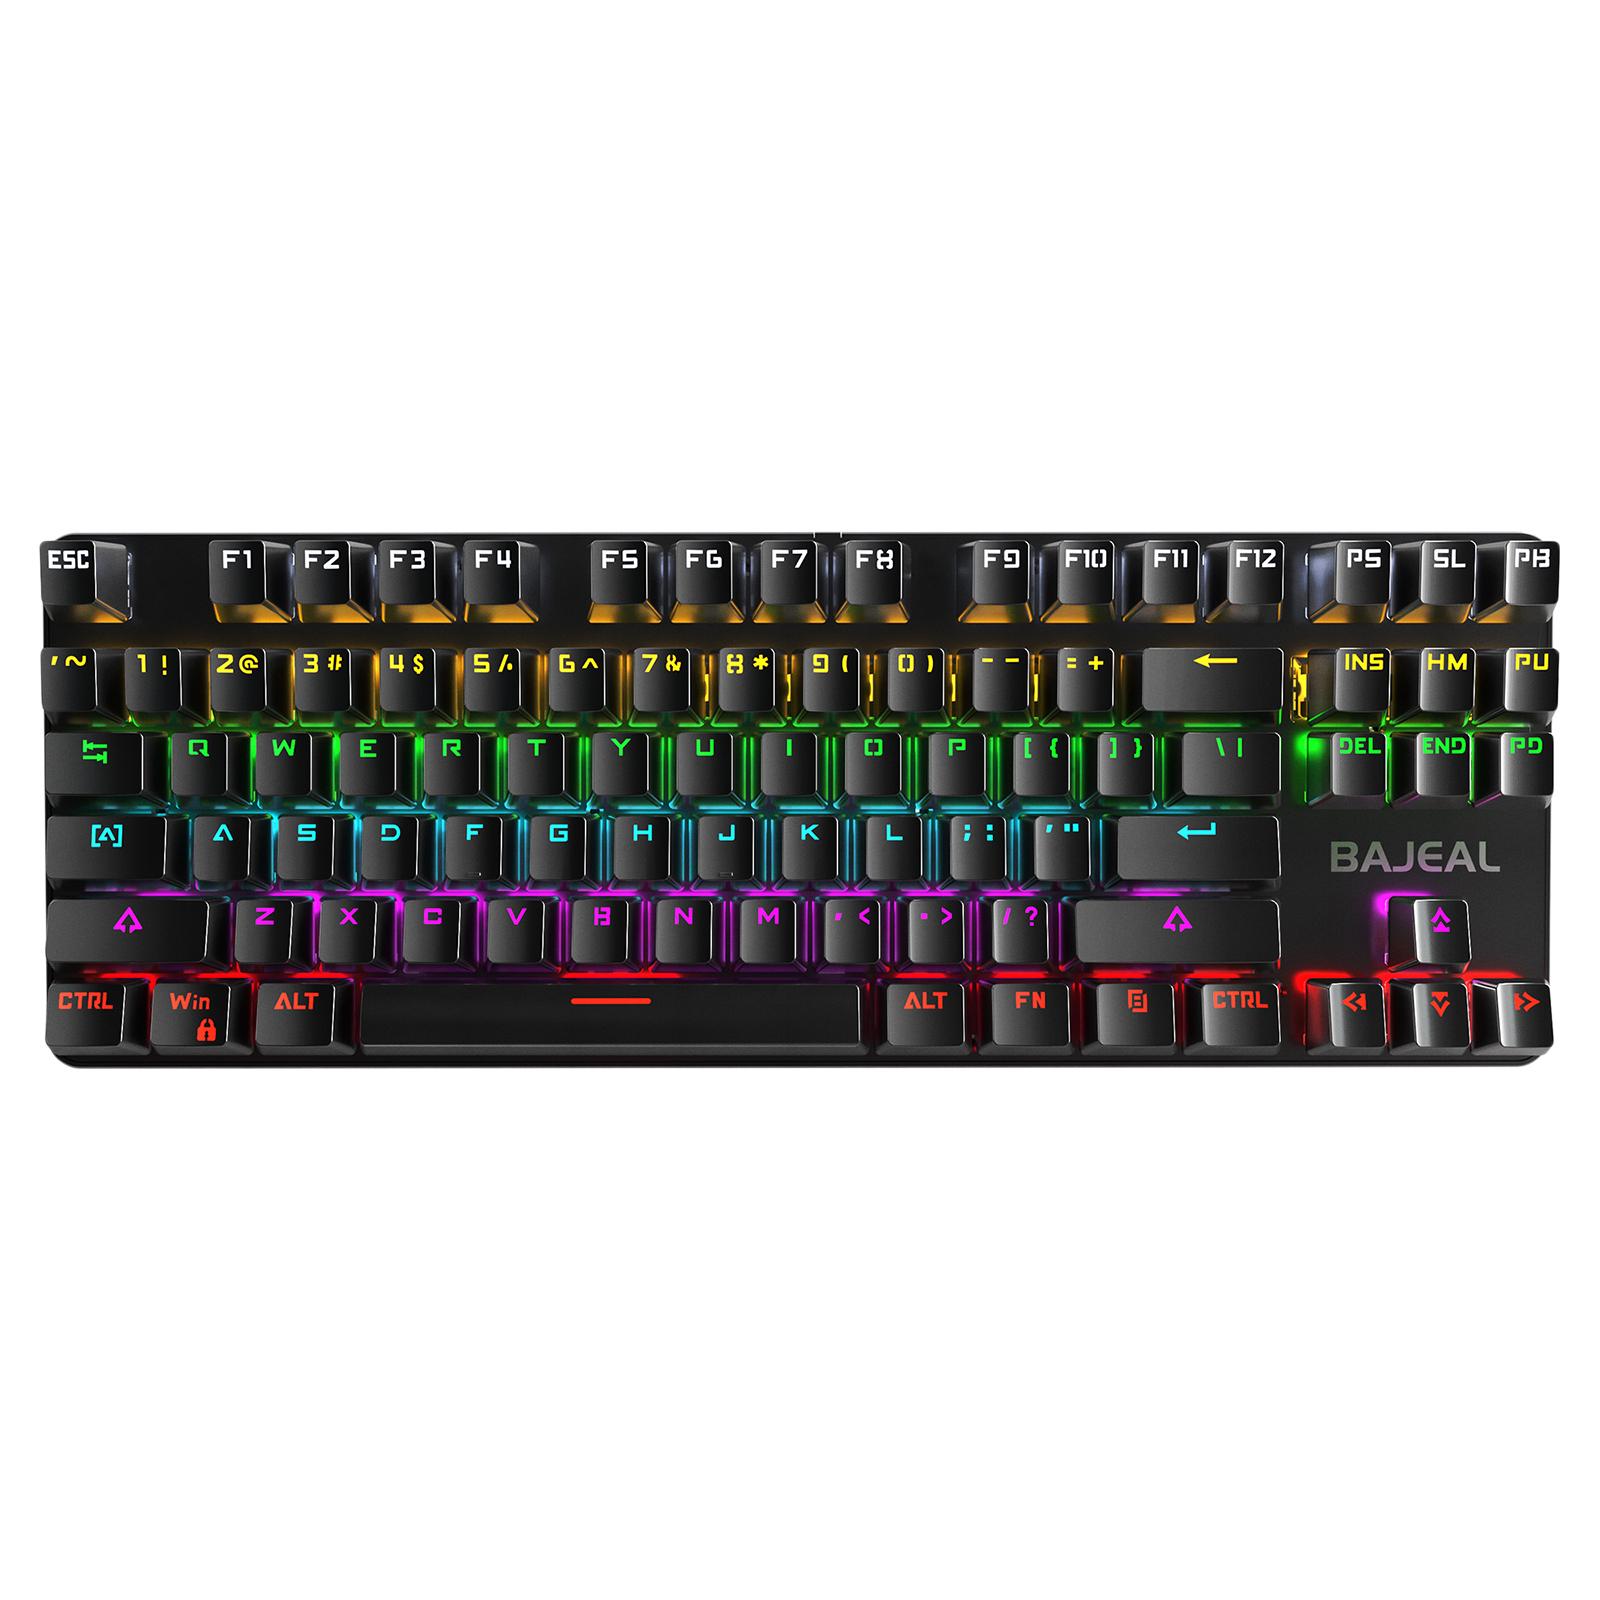 Gaming Mini Compact 87 Keys Wired Mechanical Keyboard Anti-ghosting Backlit for Computer